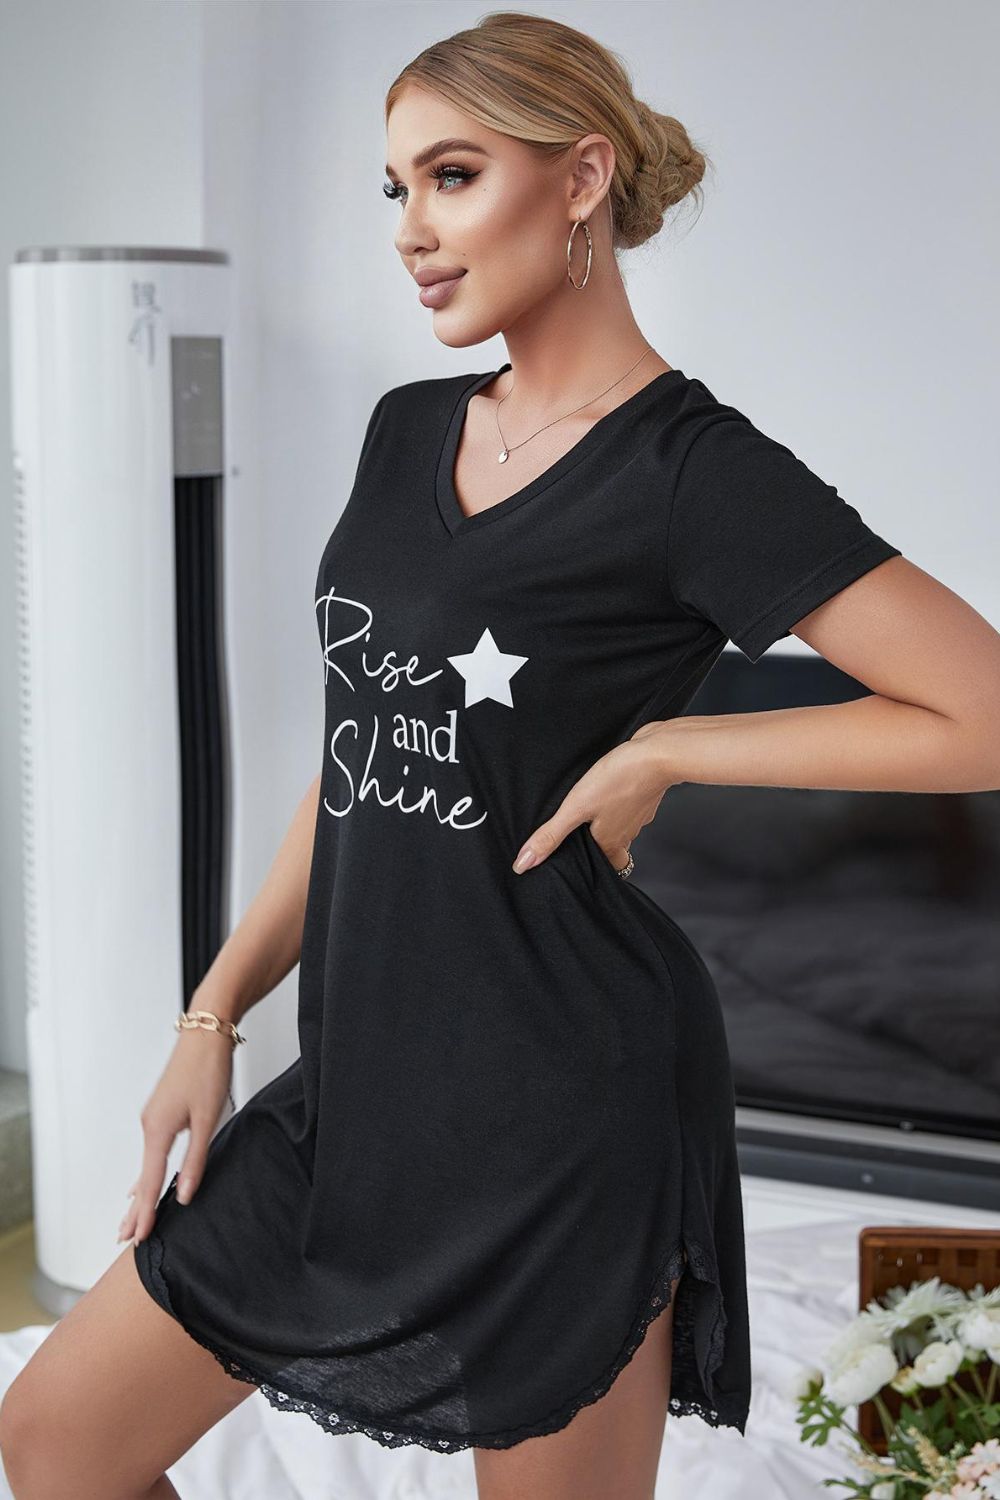 LADIES--Lounge in Style, Fun T-Shirt Dress--"RISE AND SHINE", Contrast Lace V-Neck T-Shirt Dress